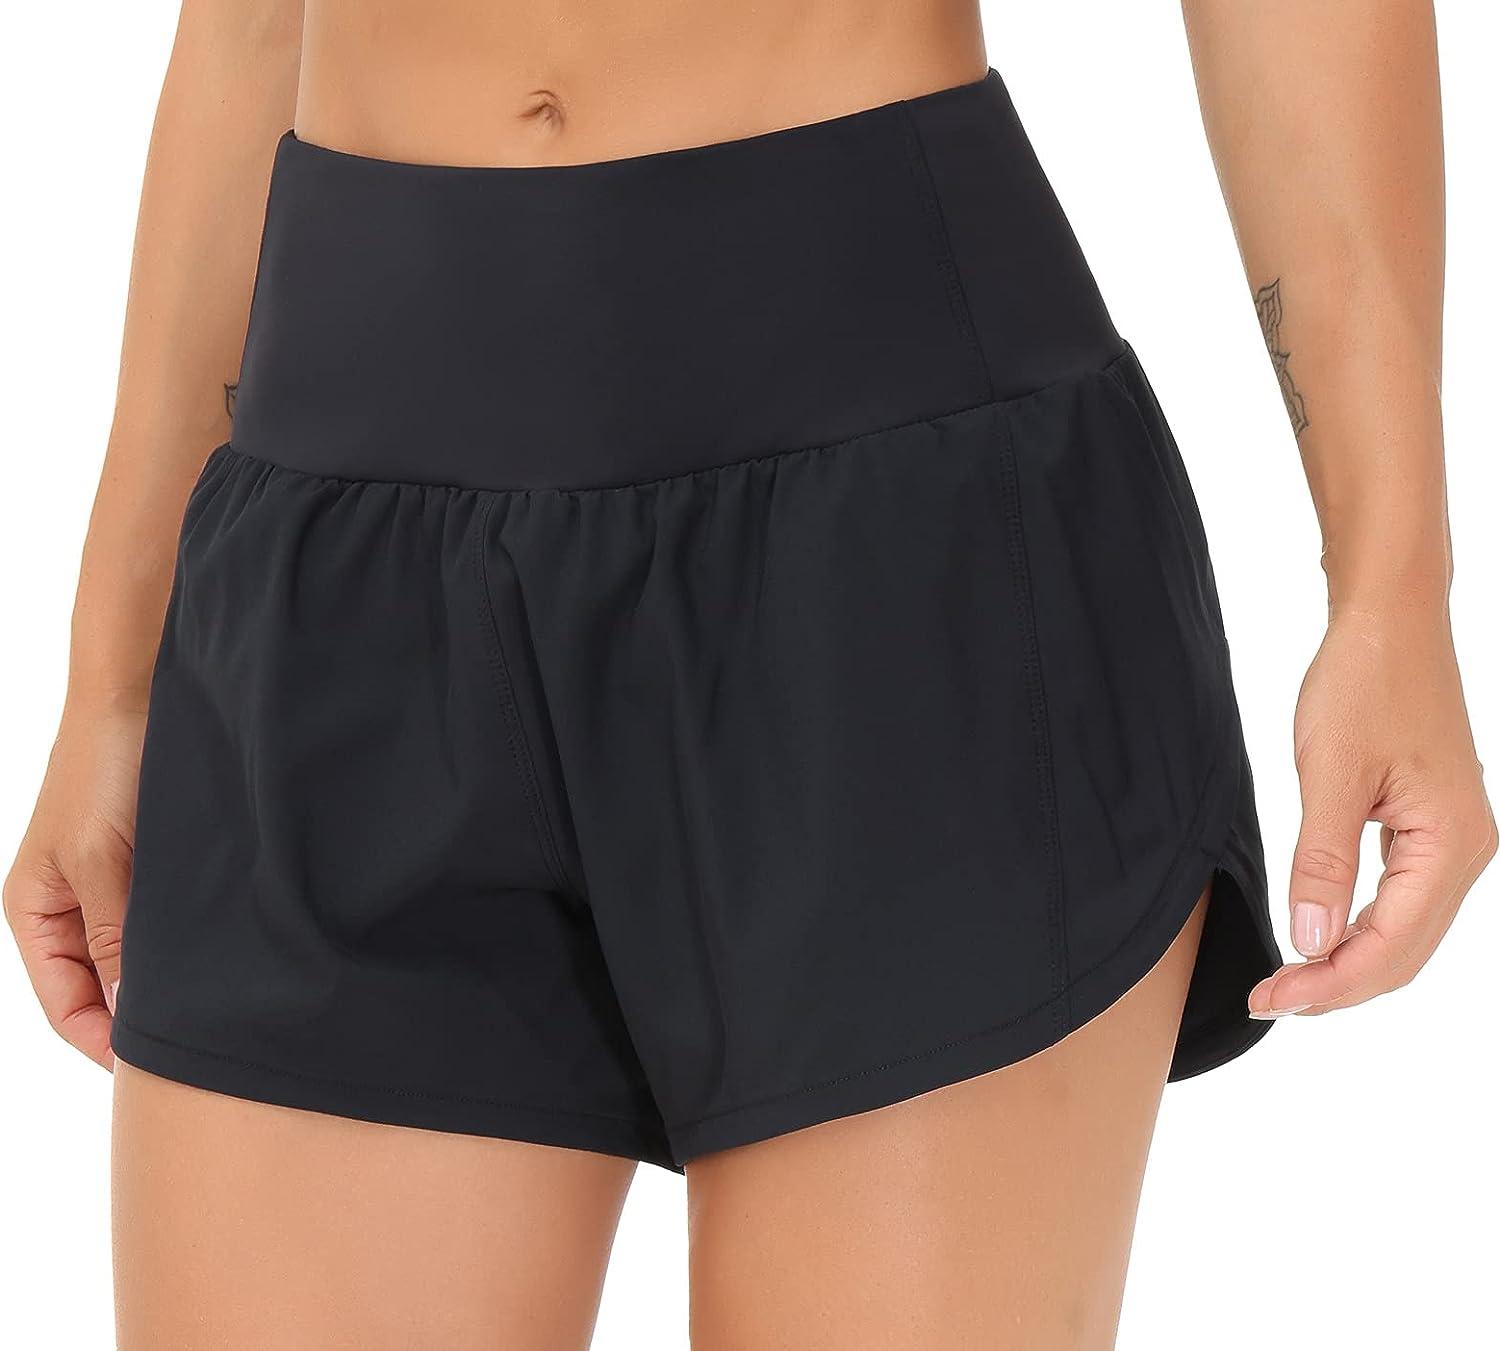 THE GYM PEOPLE Womens High Waisted Running Shorts Quick Dry Athletic  Workout Shorts with Mesh Liner Zipper Pockets Black Medium